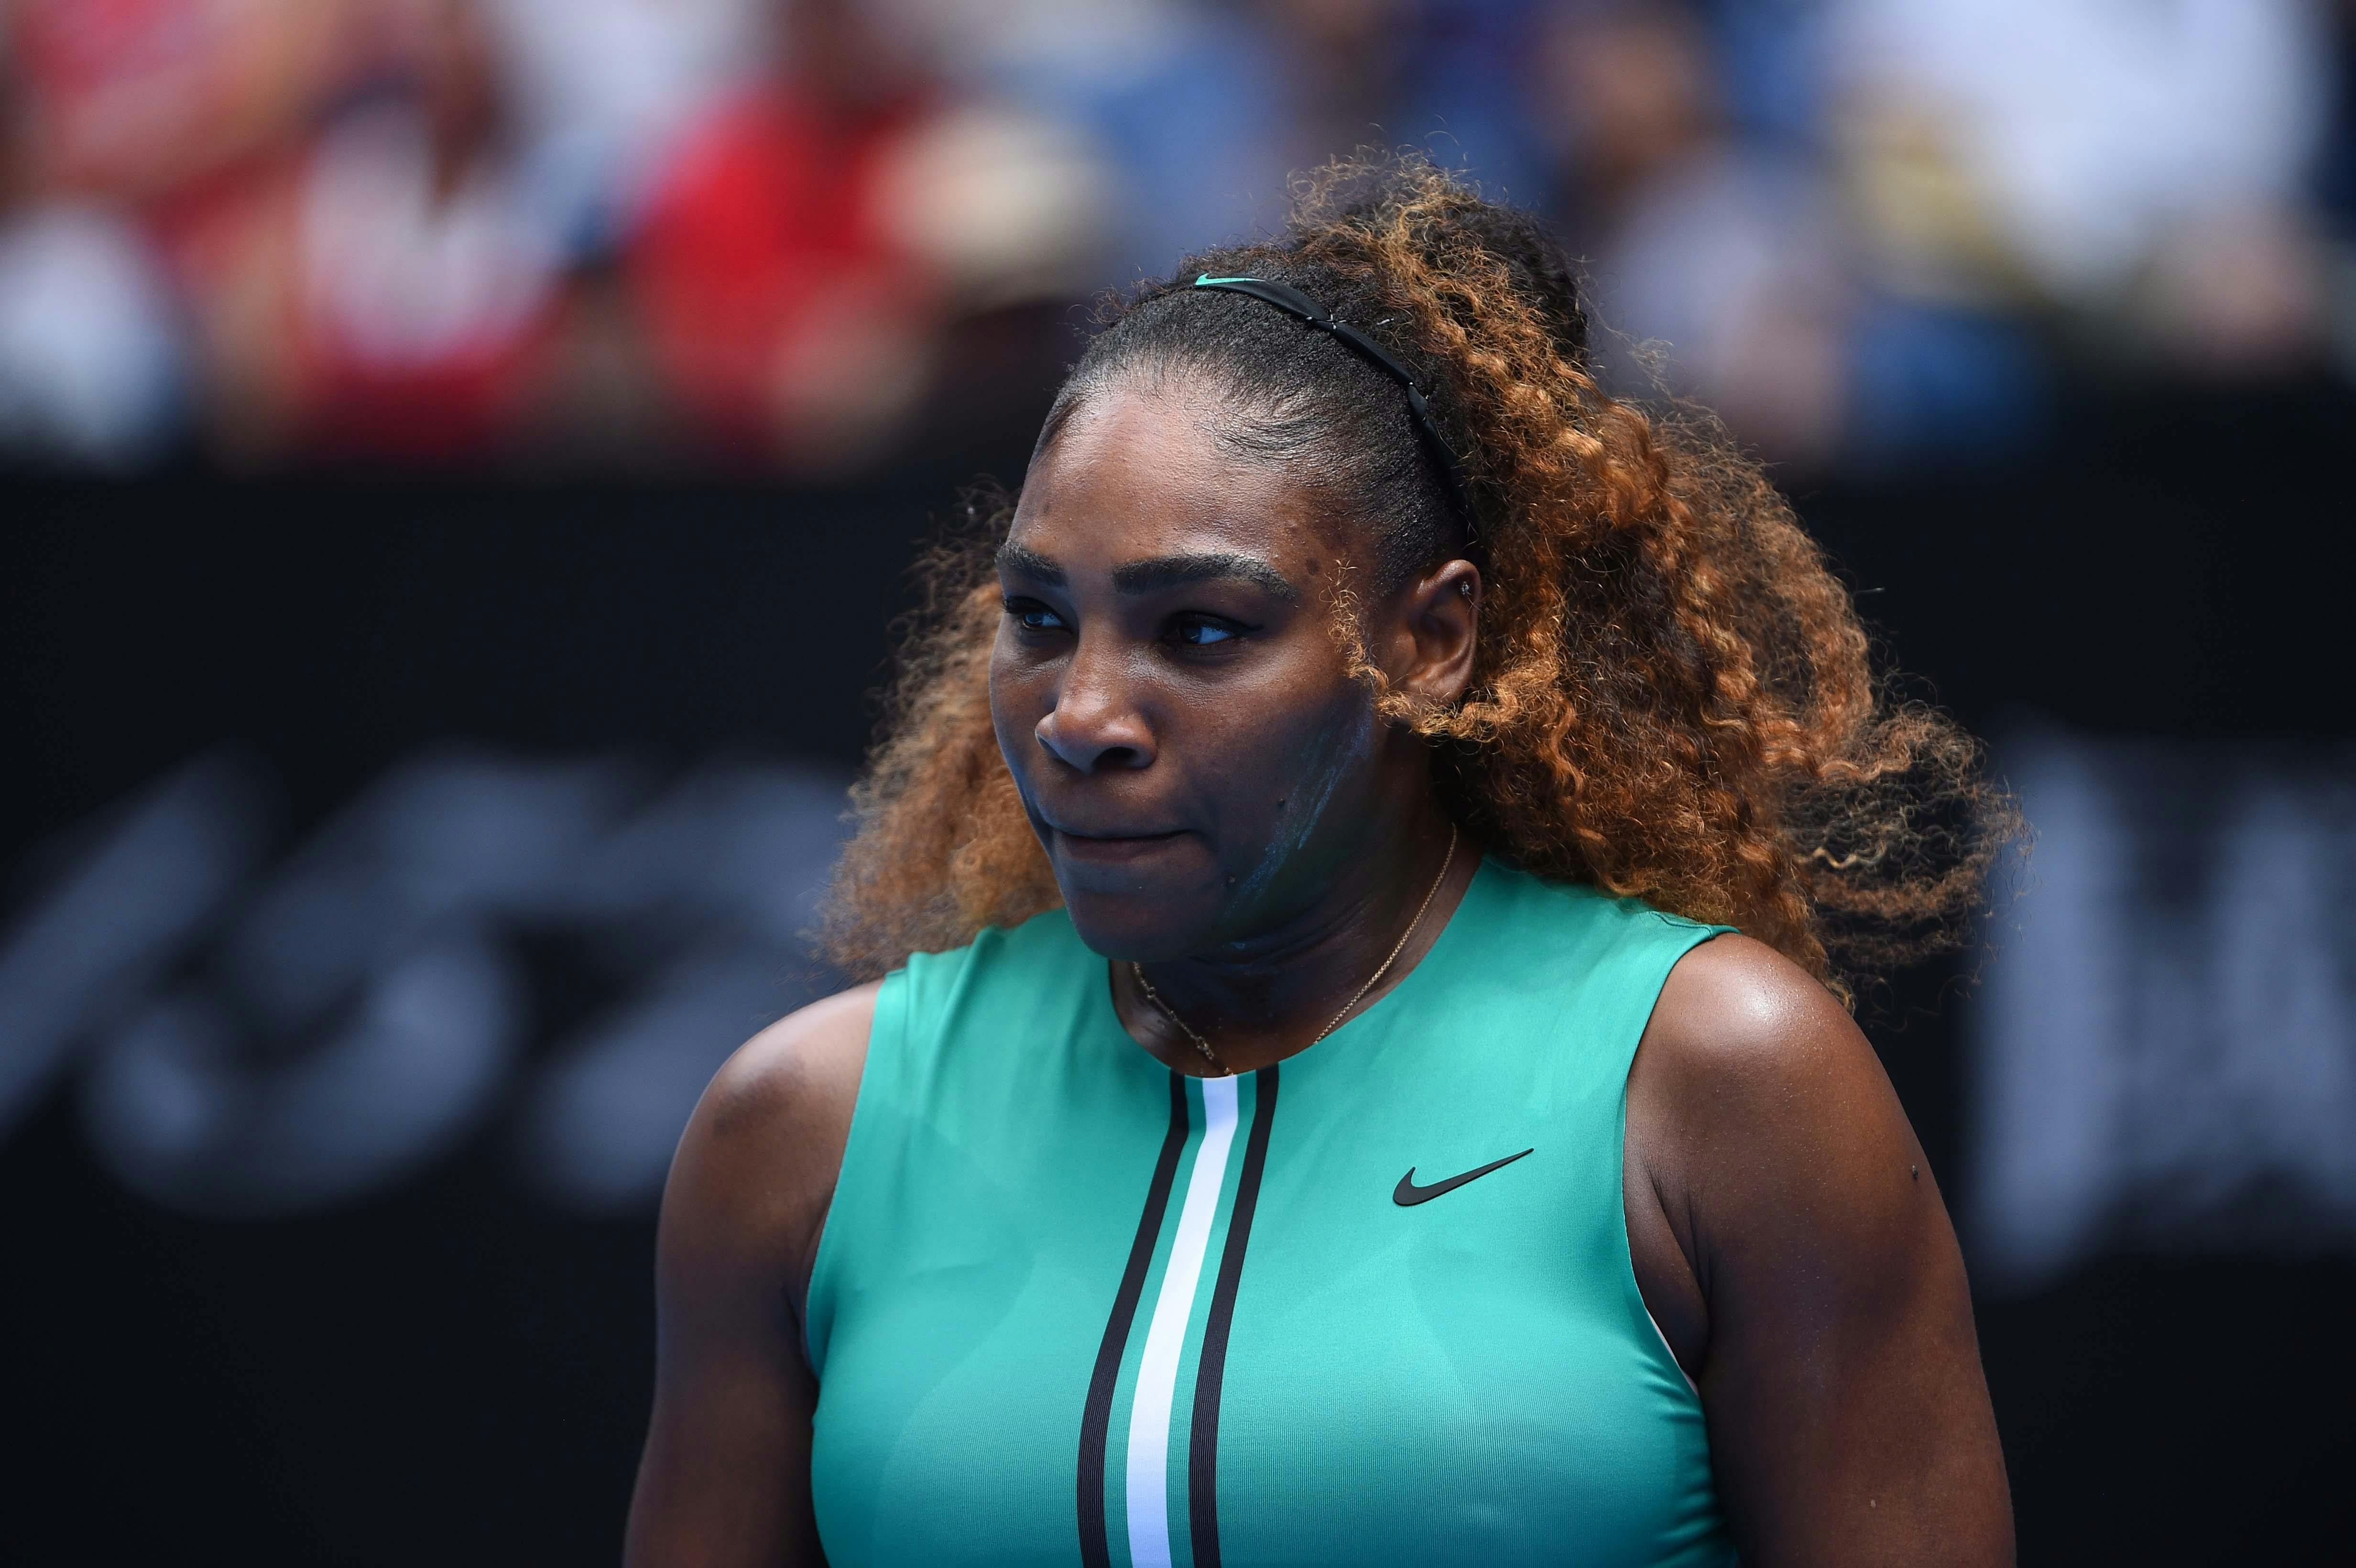 Thinking Serena Williams during her first round match at the Australian Open 2019